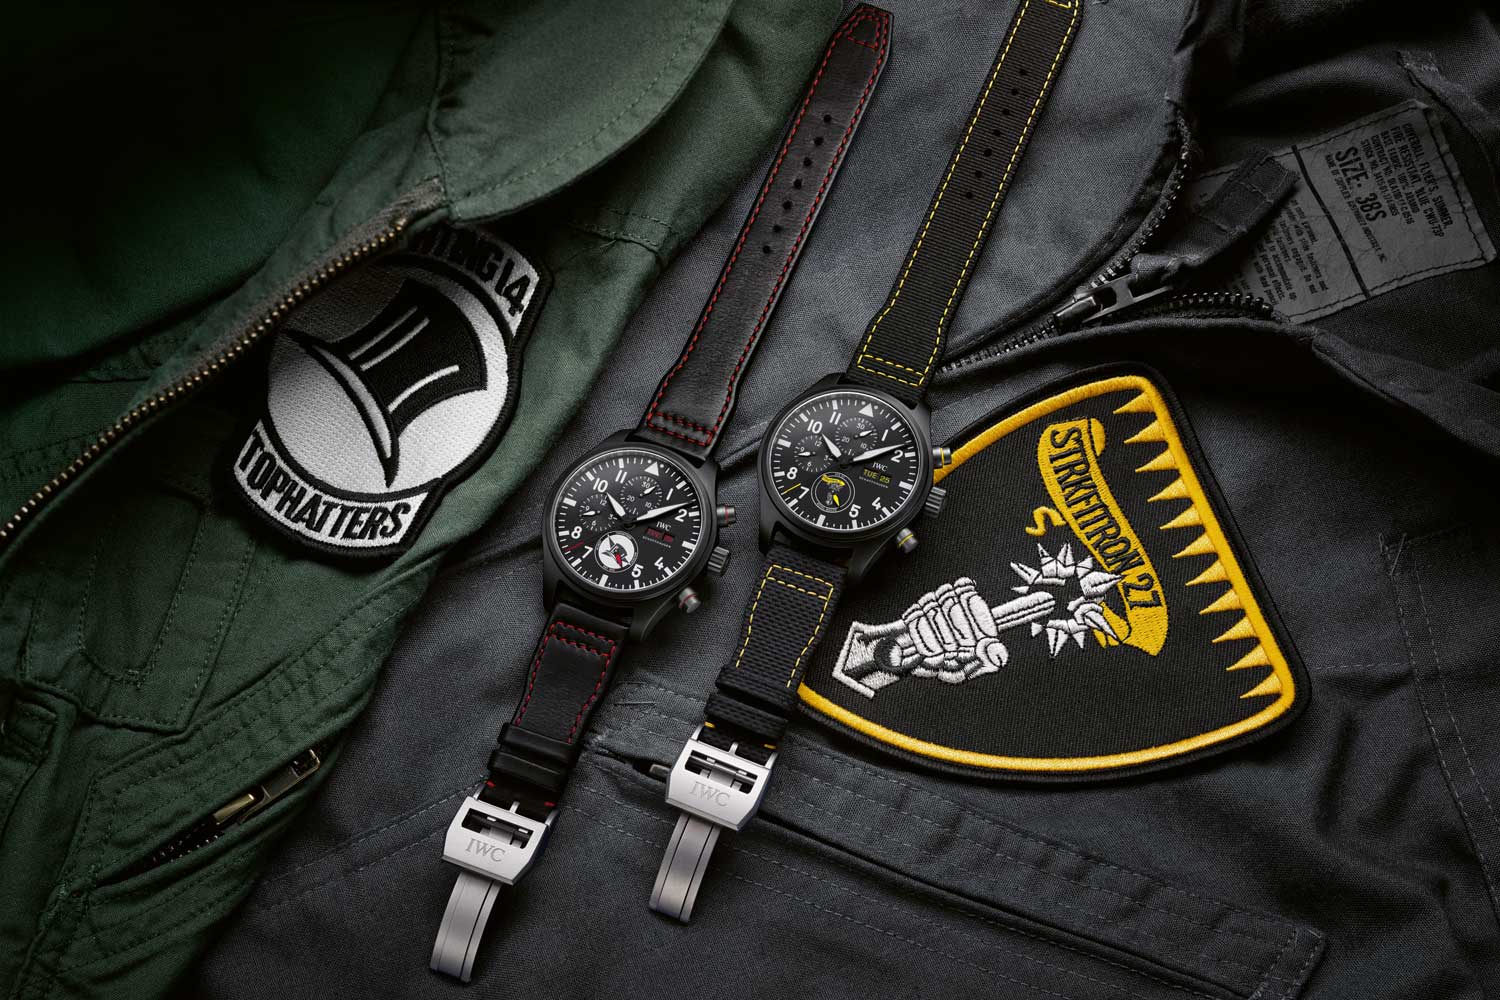 IWC has worked with various squadrons from the Top Gun tactical school to create unique collaboration pieces such as the Pilot’s Watch Chronograph Edition “Tophatters” ref. IW389108 (left) and the Pilot’s Watch Chronograph Edition “Royal Maces” ref. IW389107